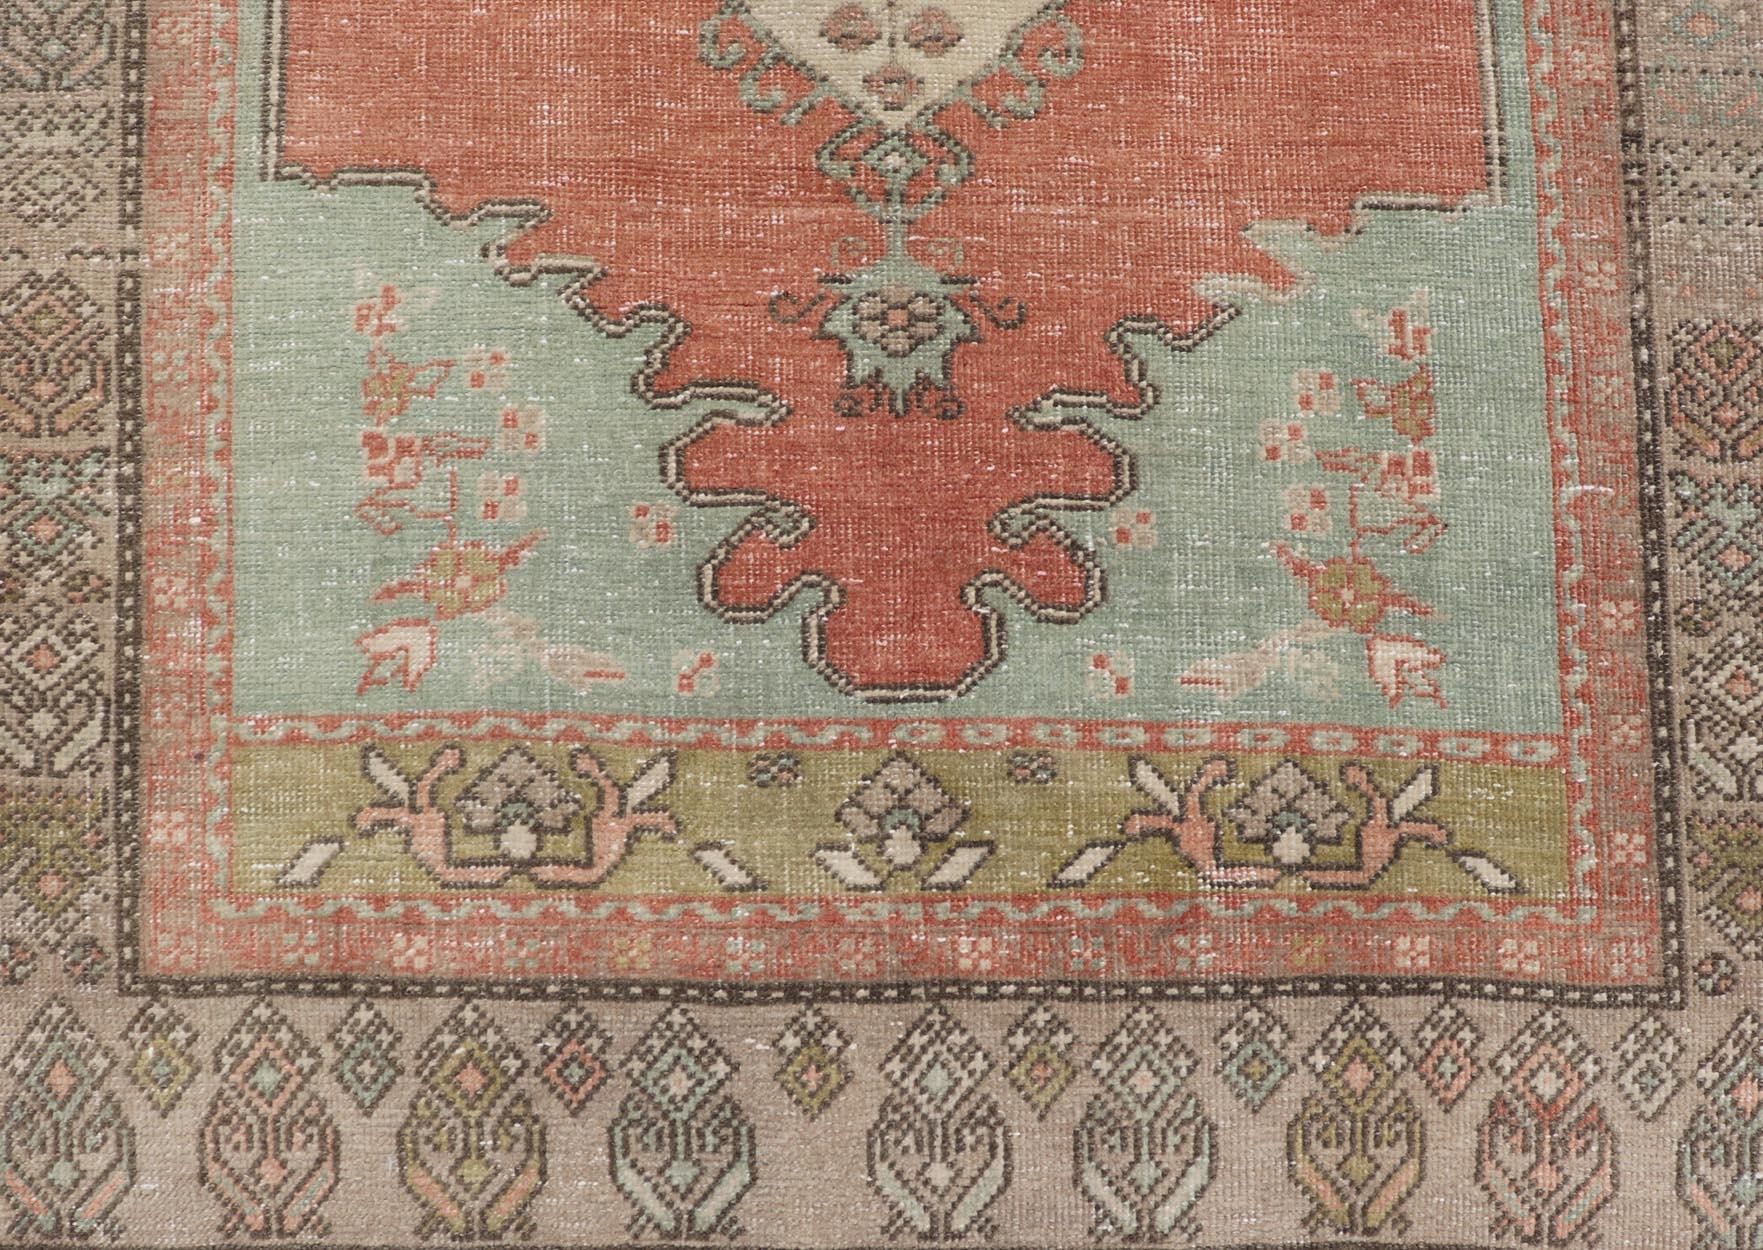 Vintage Turkish Oushak Rug With Medallion in Earthy Color Tones With Coral Color. Keivan Woven Arts / rug EN-14597, country of origin / type: Turkey / Oushak, circa 1940
Measures: 3'2 x 5'11 
This vintage Oushak carpet from Turkey has center